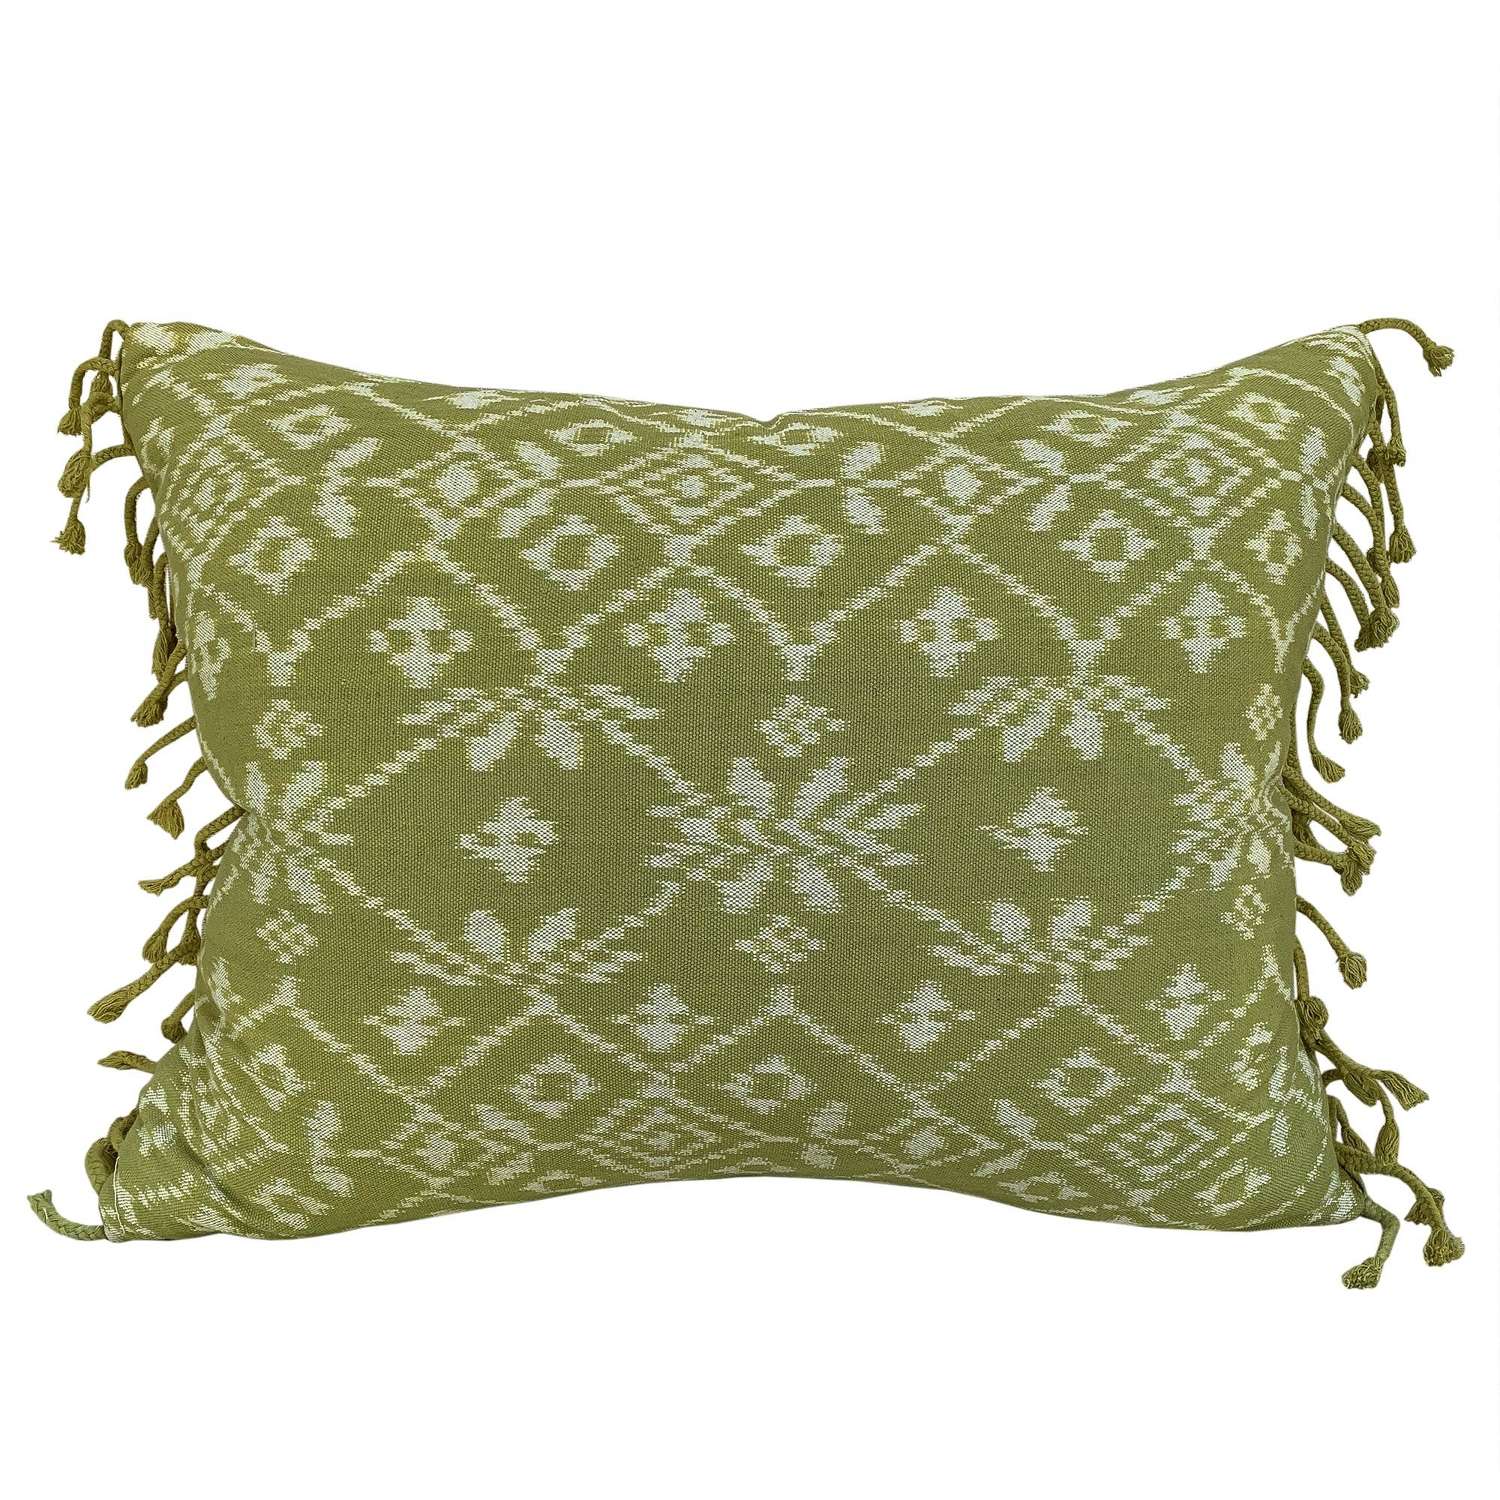 Rote ikat cushions, green with tassel fringe